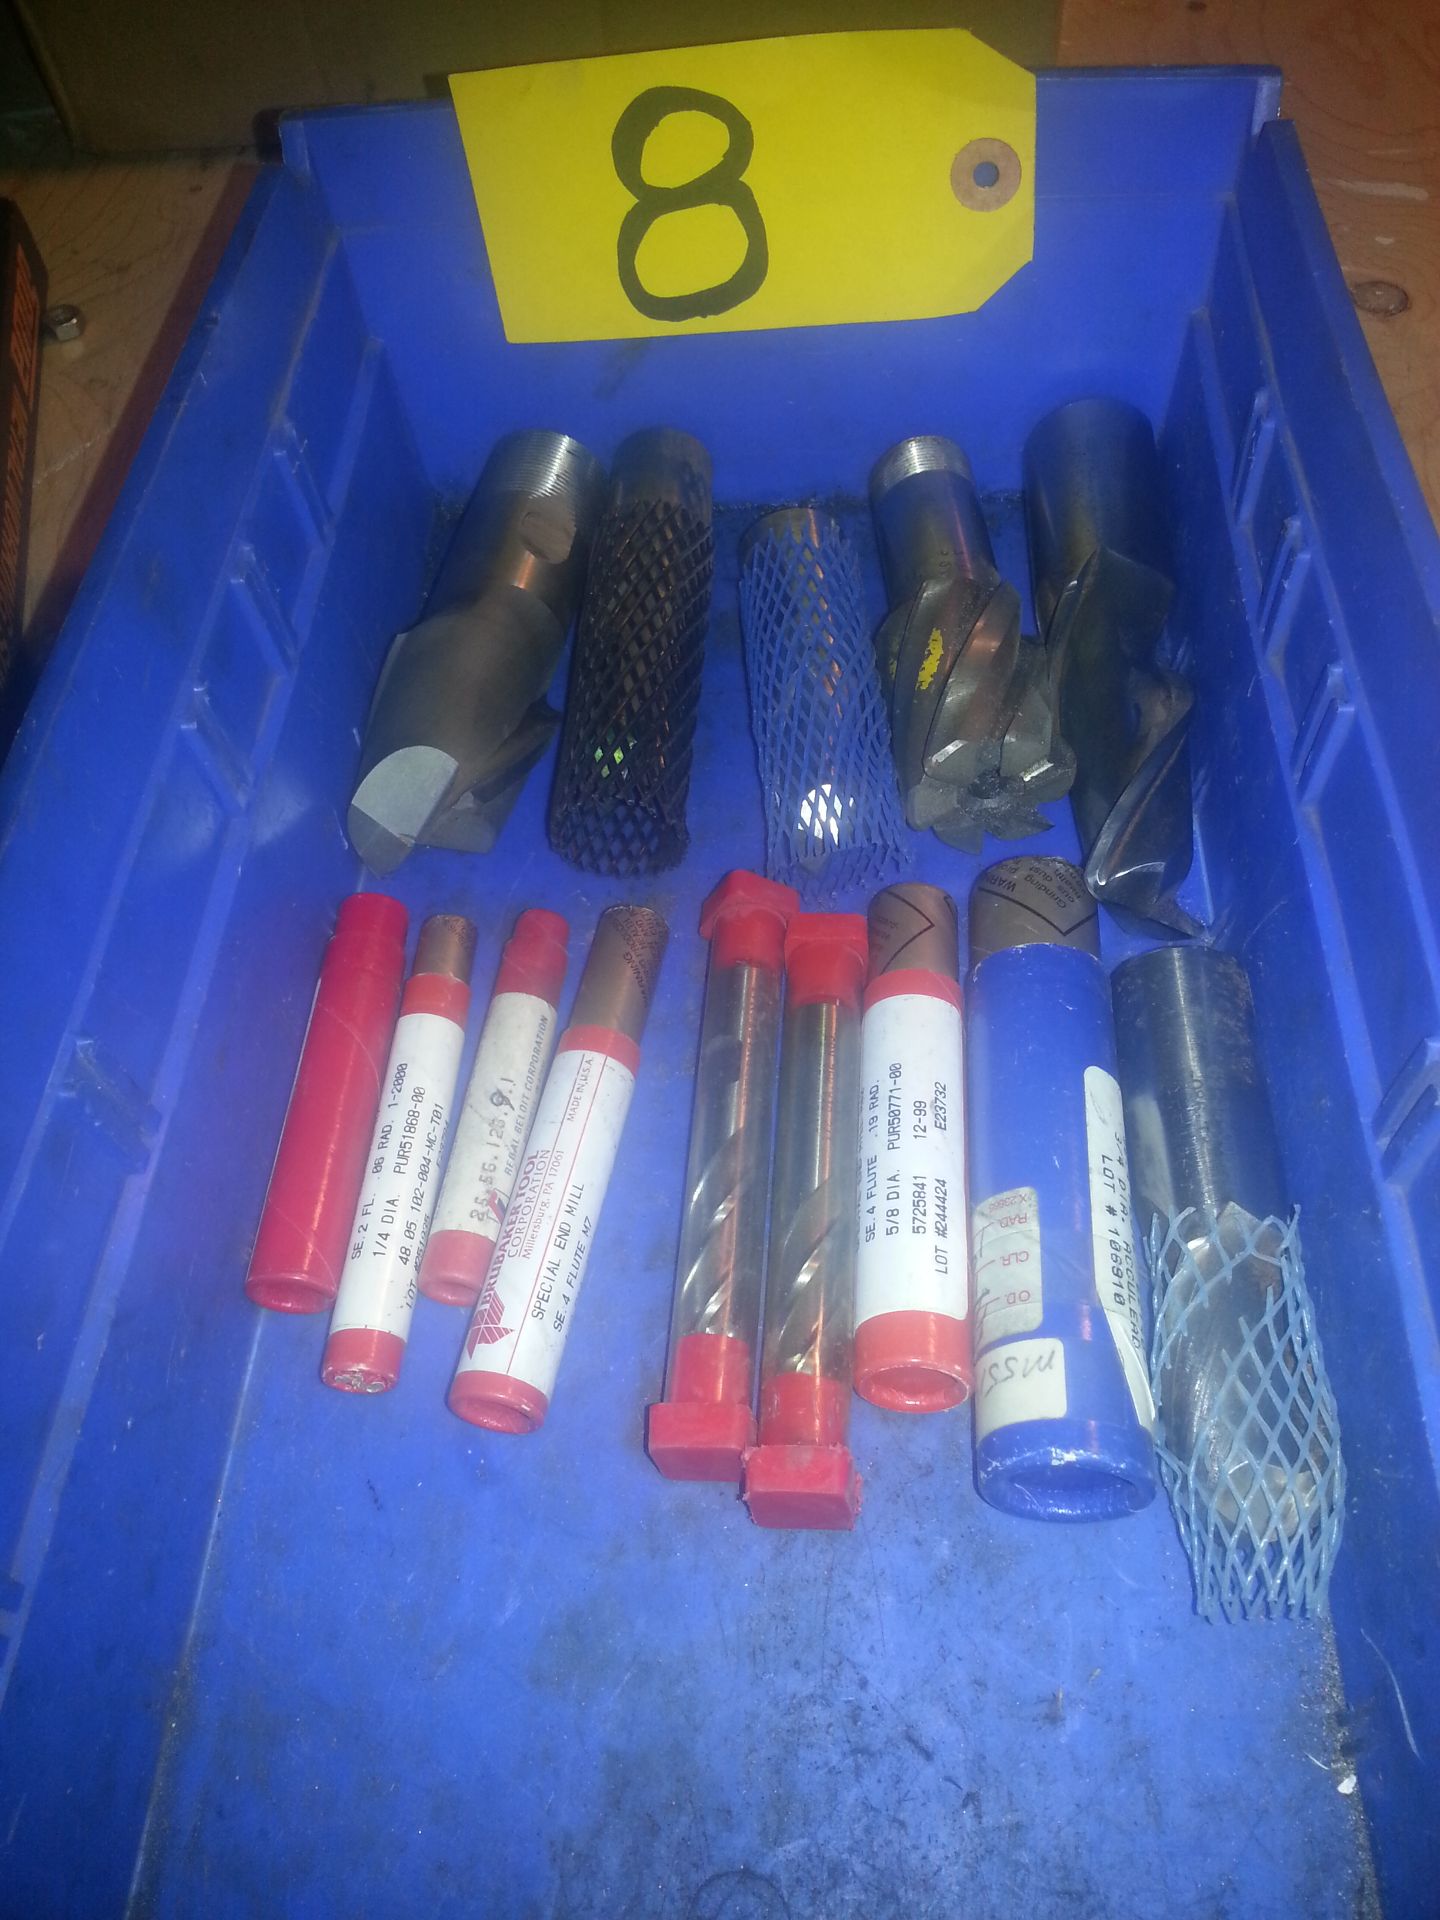 Lot of Assorted End Mills - Image 2 of 3